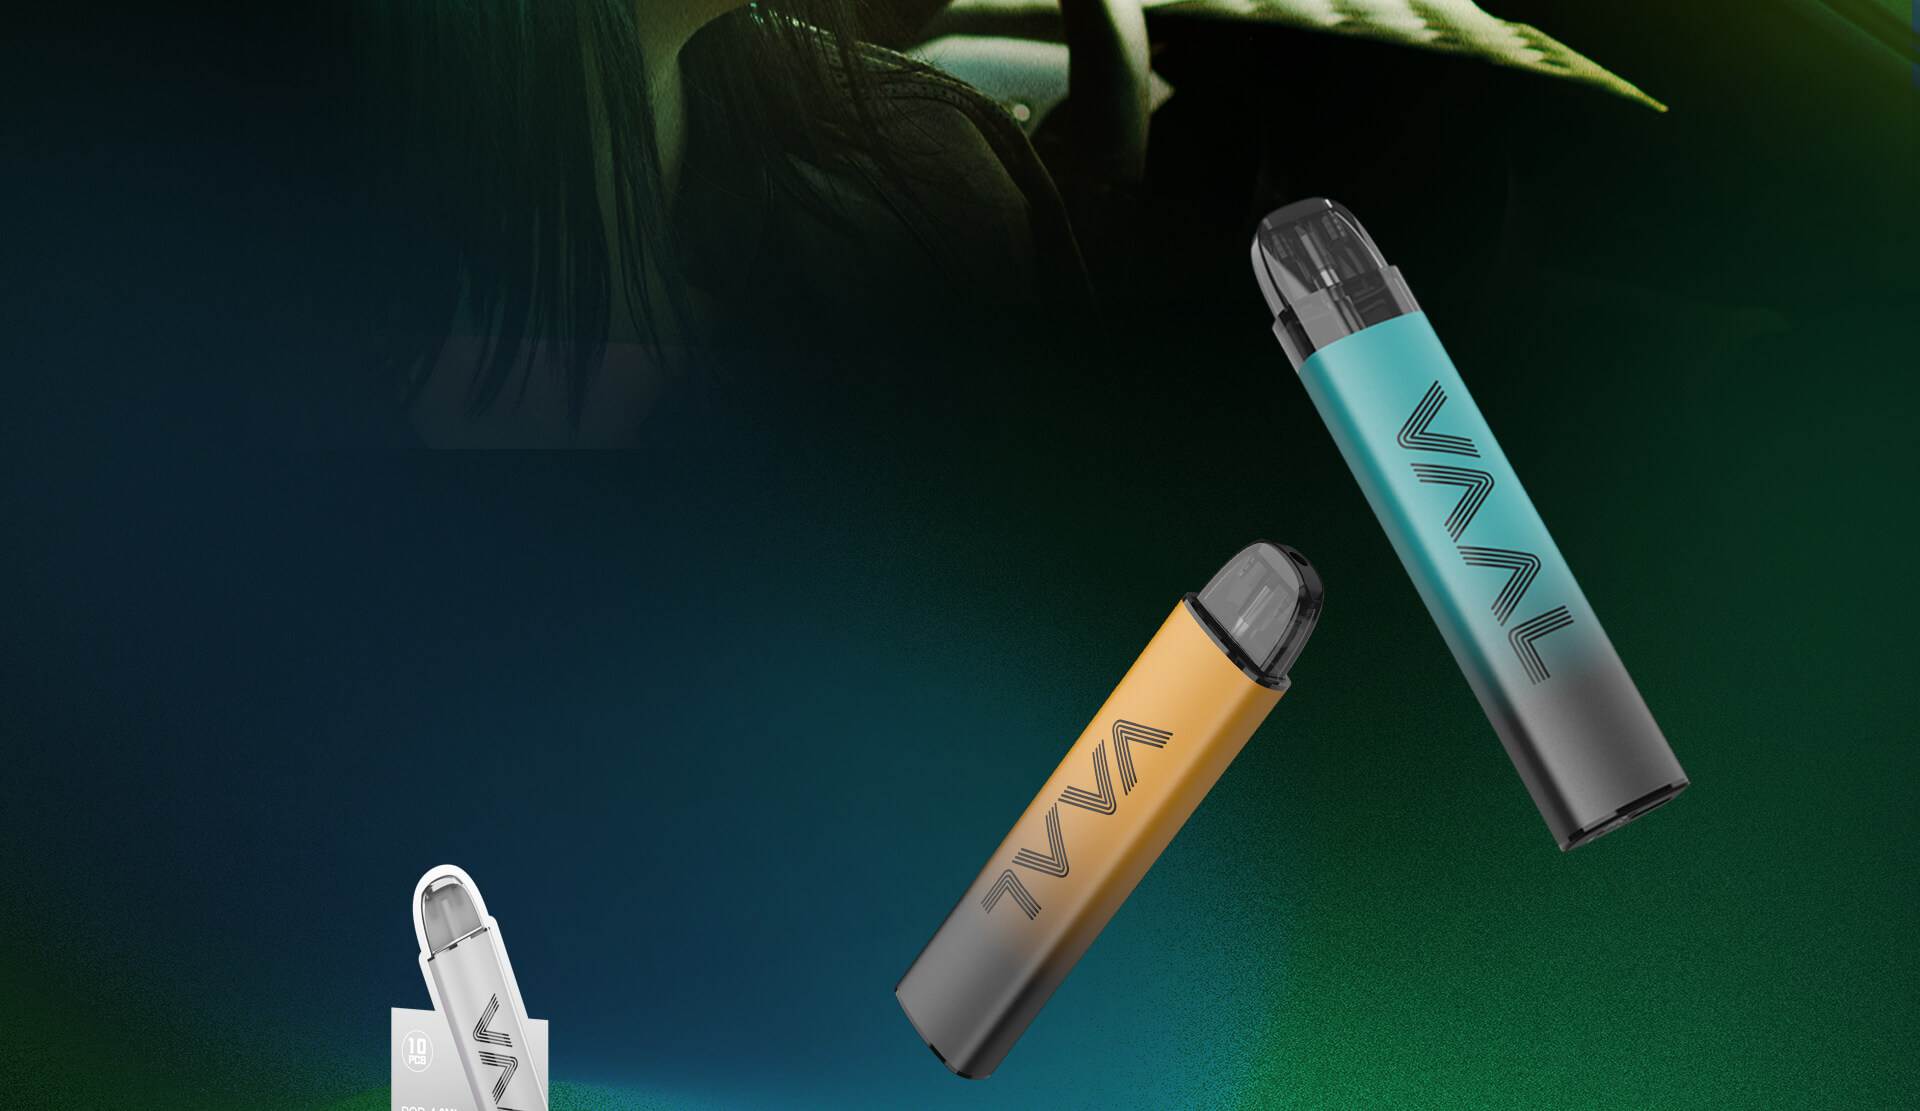 Specification of VAAL CC Disposable Vape Kit: 900mAh battery, USB-C charging, 1.2ohm mesh coil.